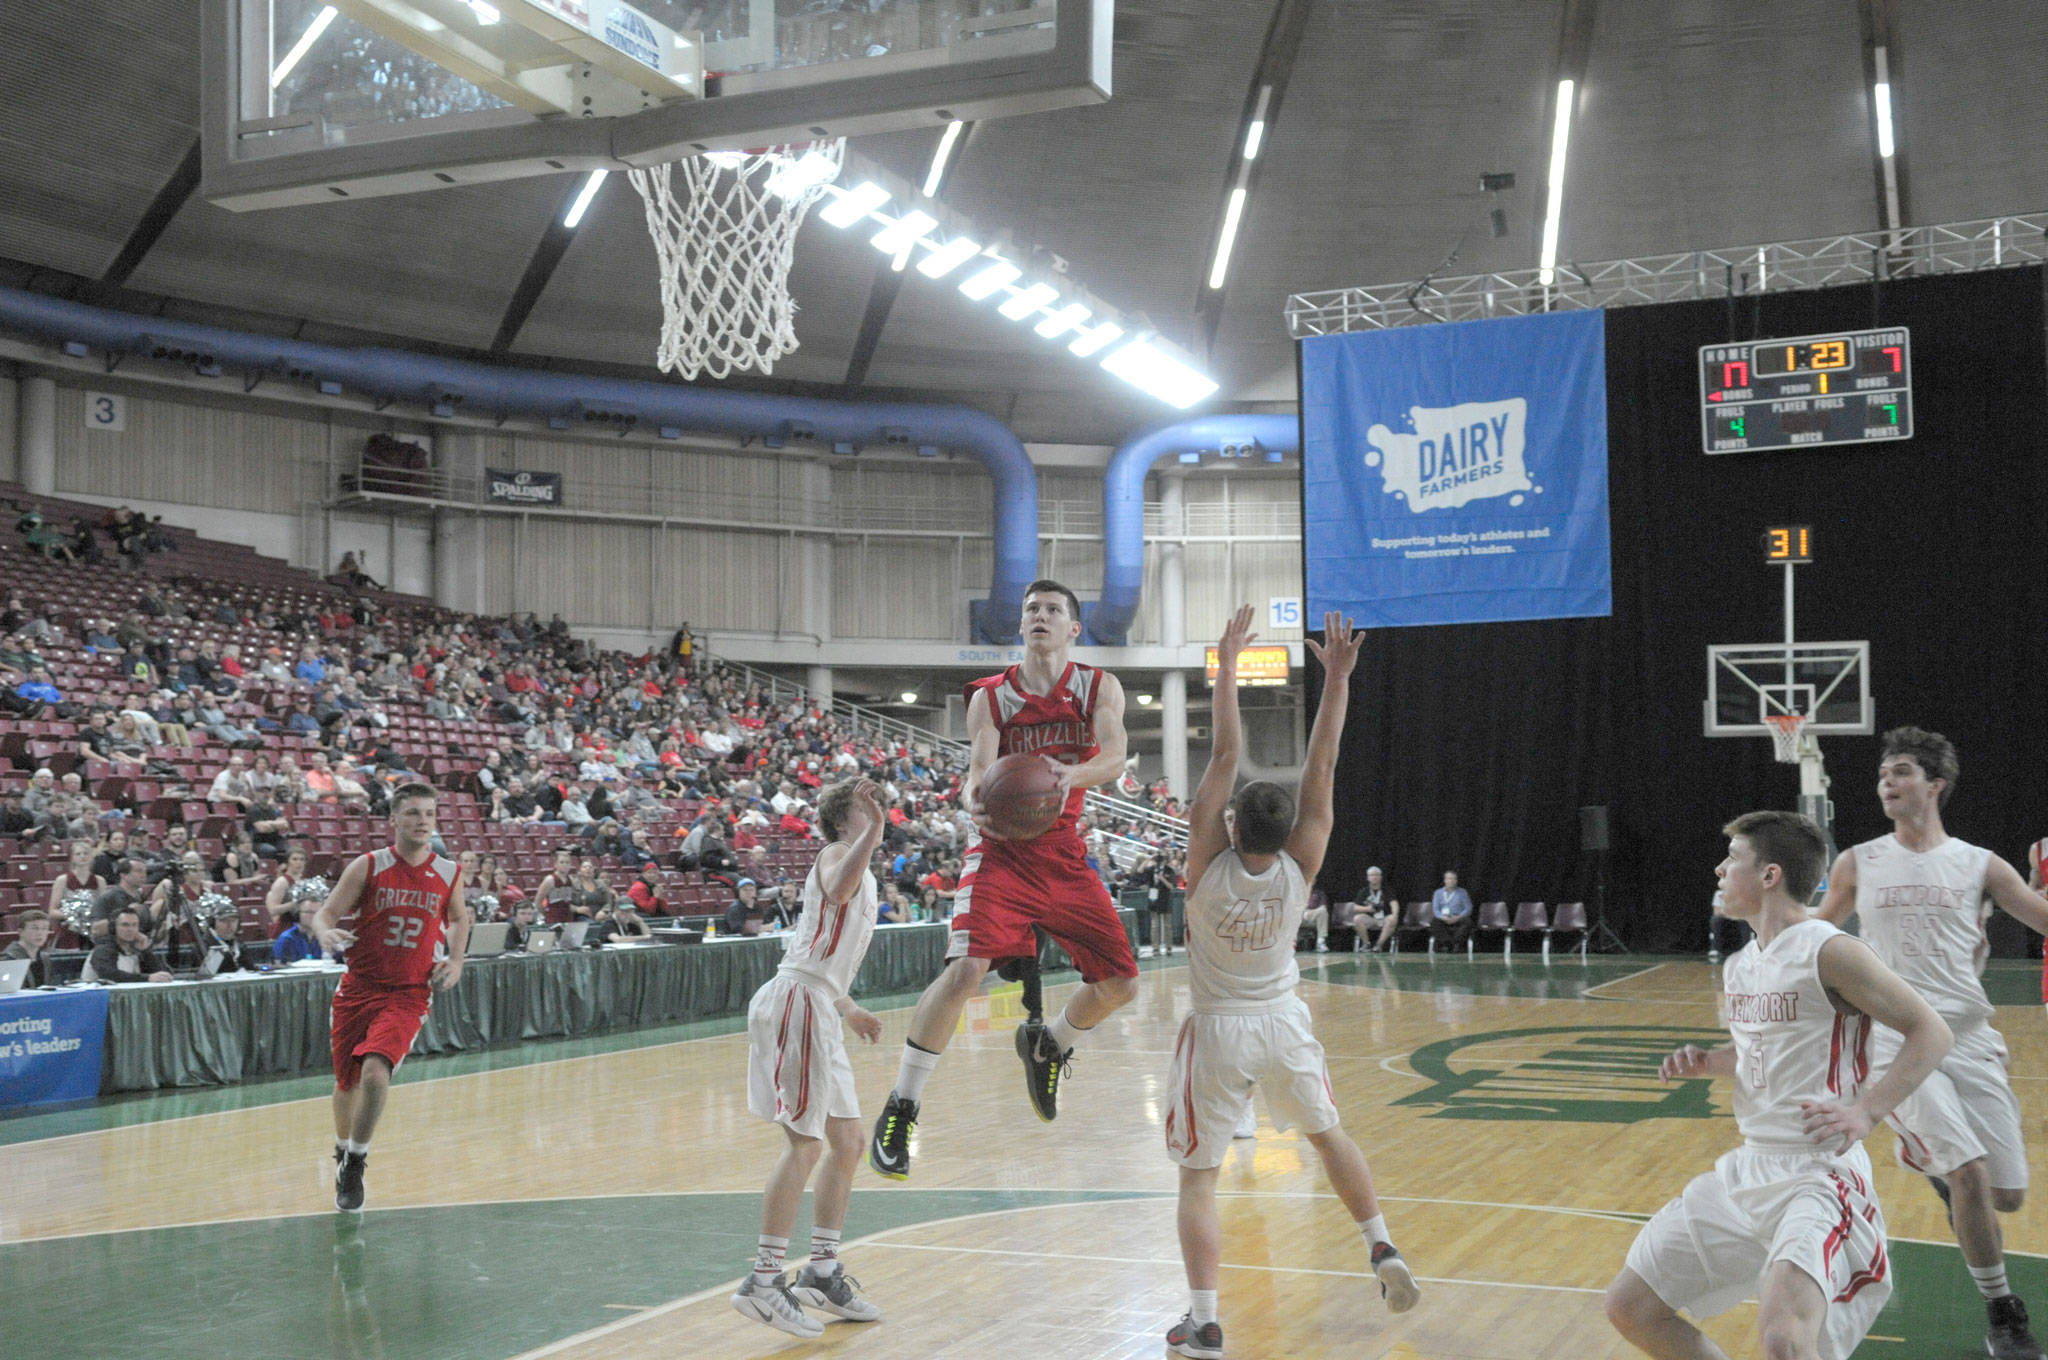 (Brendan Carl | The Daily World) Hoquiam’s Jack Adams III drives through the middle of the key to the basket during Wednesday’s state 1A boys basketball loser-out opening round contest against Newport at the Yakima SunDome. Newport needed a last-second 3-pointer to defeat Hoquiam, 57-56.